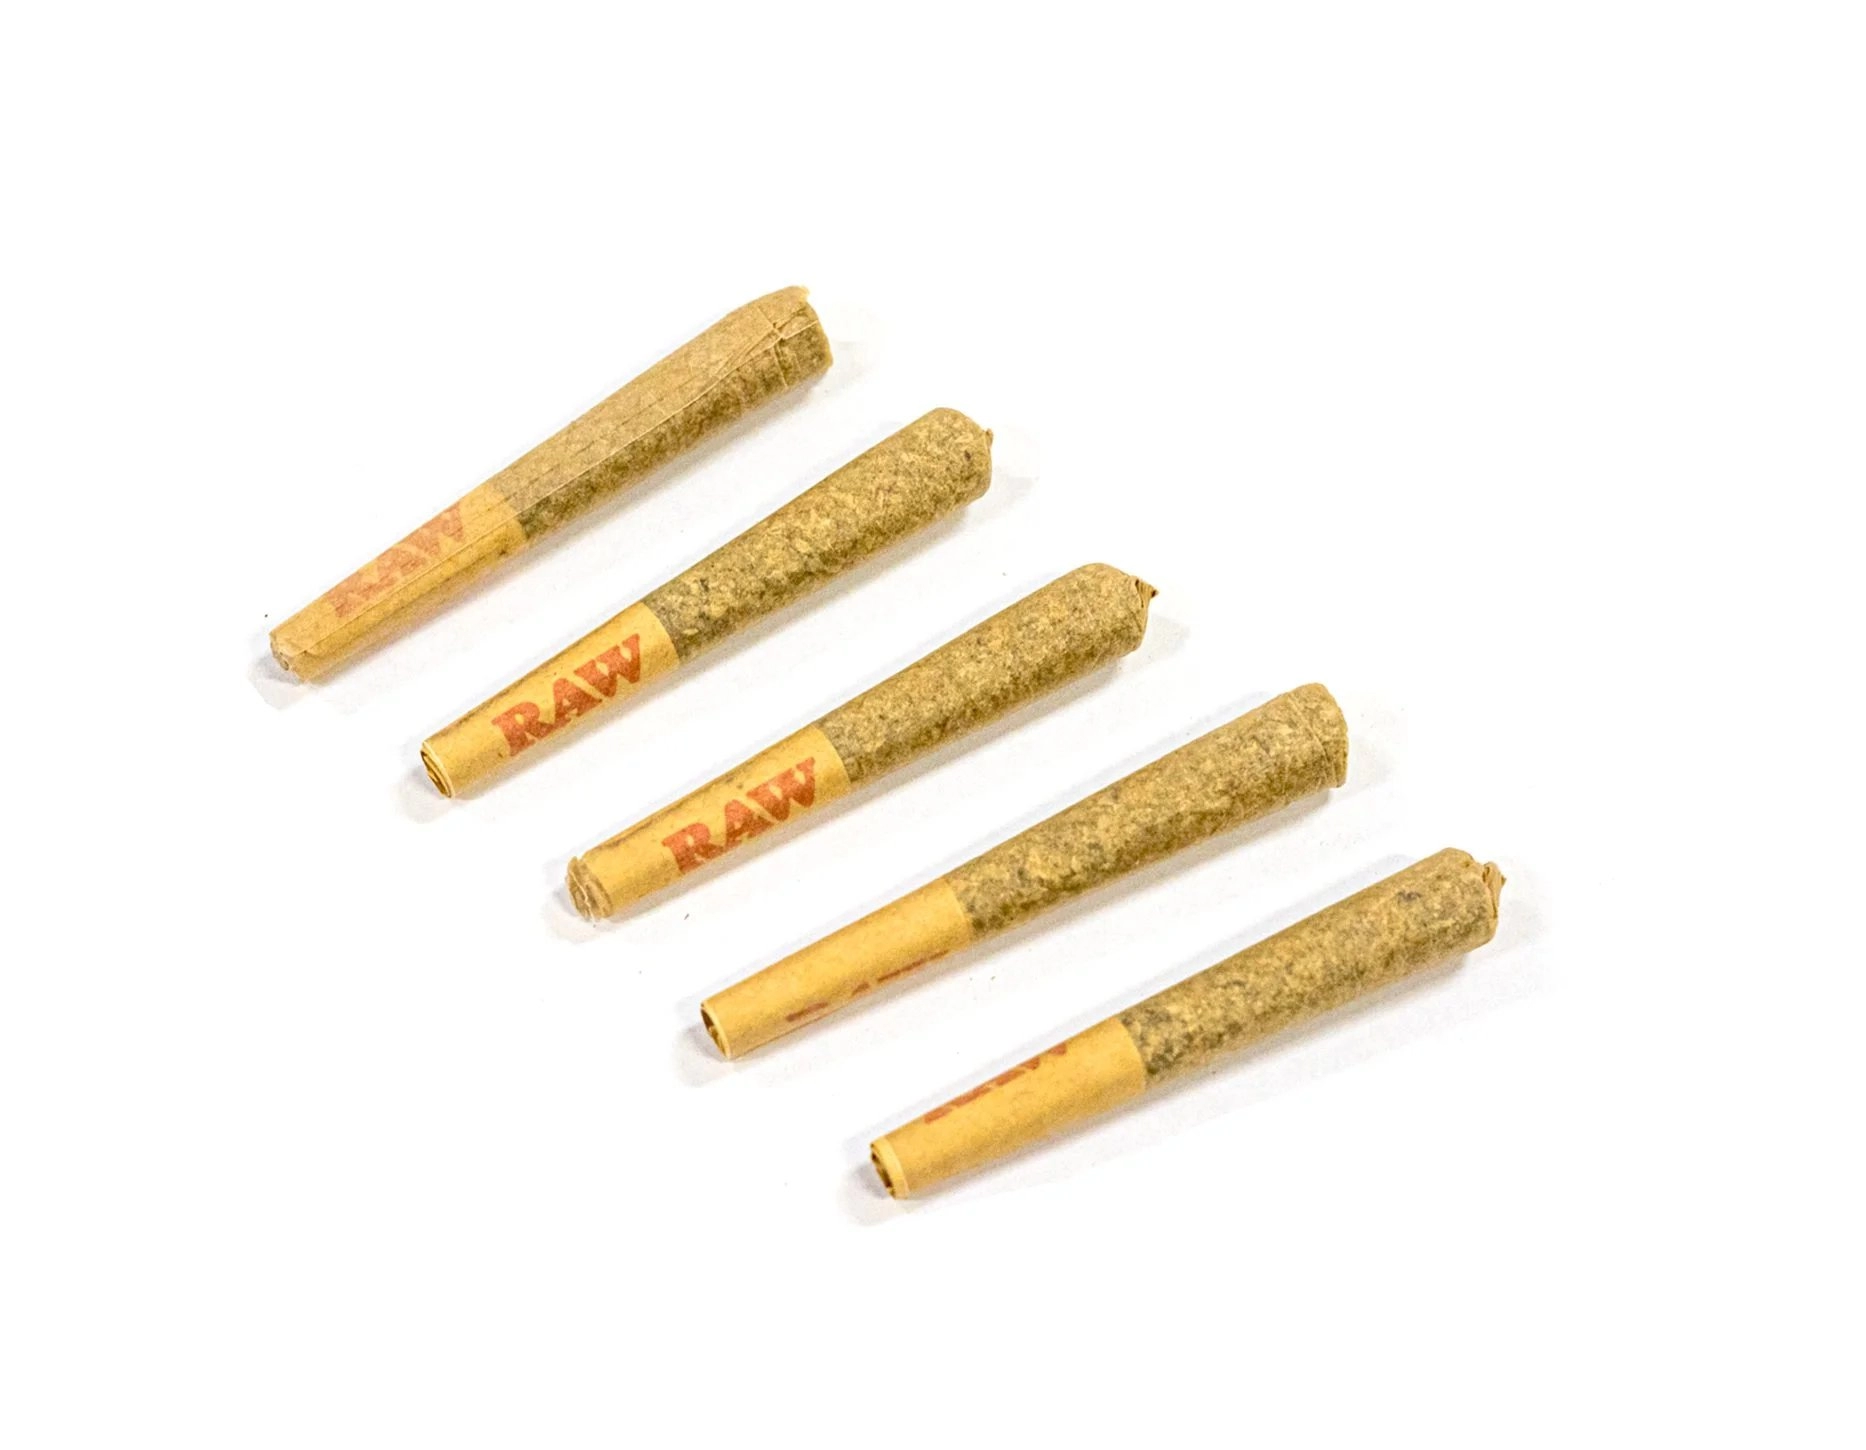 Kush Kraft Premium Pre-rolls - Blue Widow Available For Delivery - Chillin Cheetah